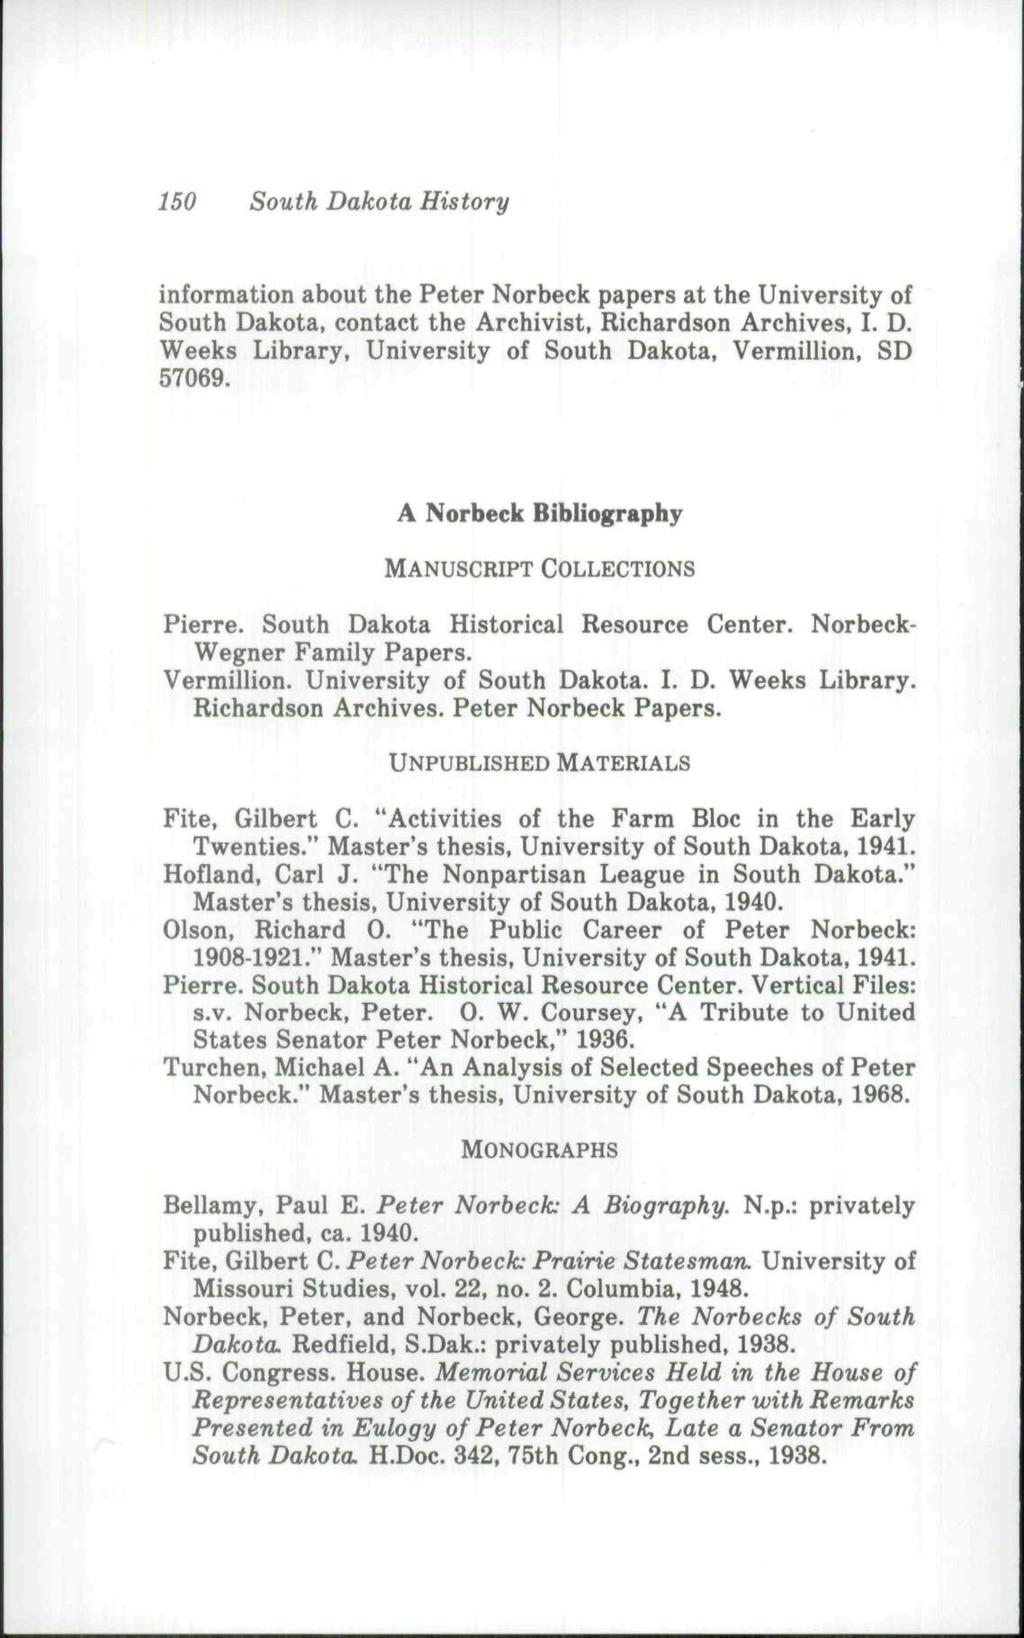 150 South Dakota History information about the Peter Norbeck papers at the University of South Dakota, contact the Archivist, Richardson Archives. I. D. Weeks Library, University of South Dakota, Vermillion, SD 57069.